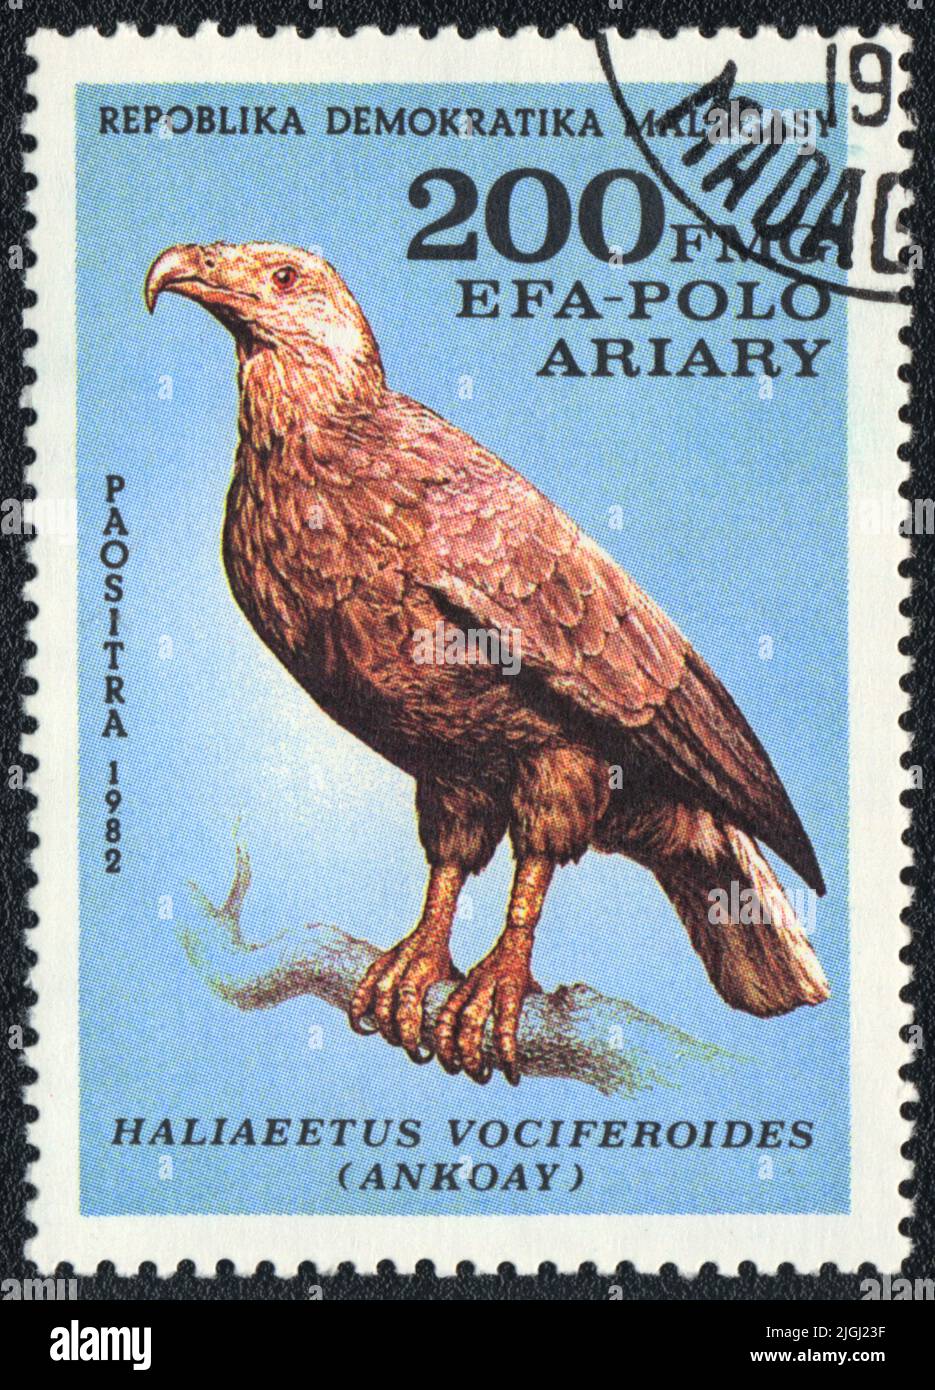 A stamp printed in MALAGASY shows Madagascar Fish Eagle (Haliaeetus vociferoides, ankoay), from series Birds, 1982 Stock Photo